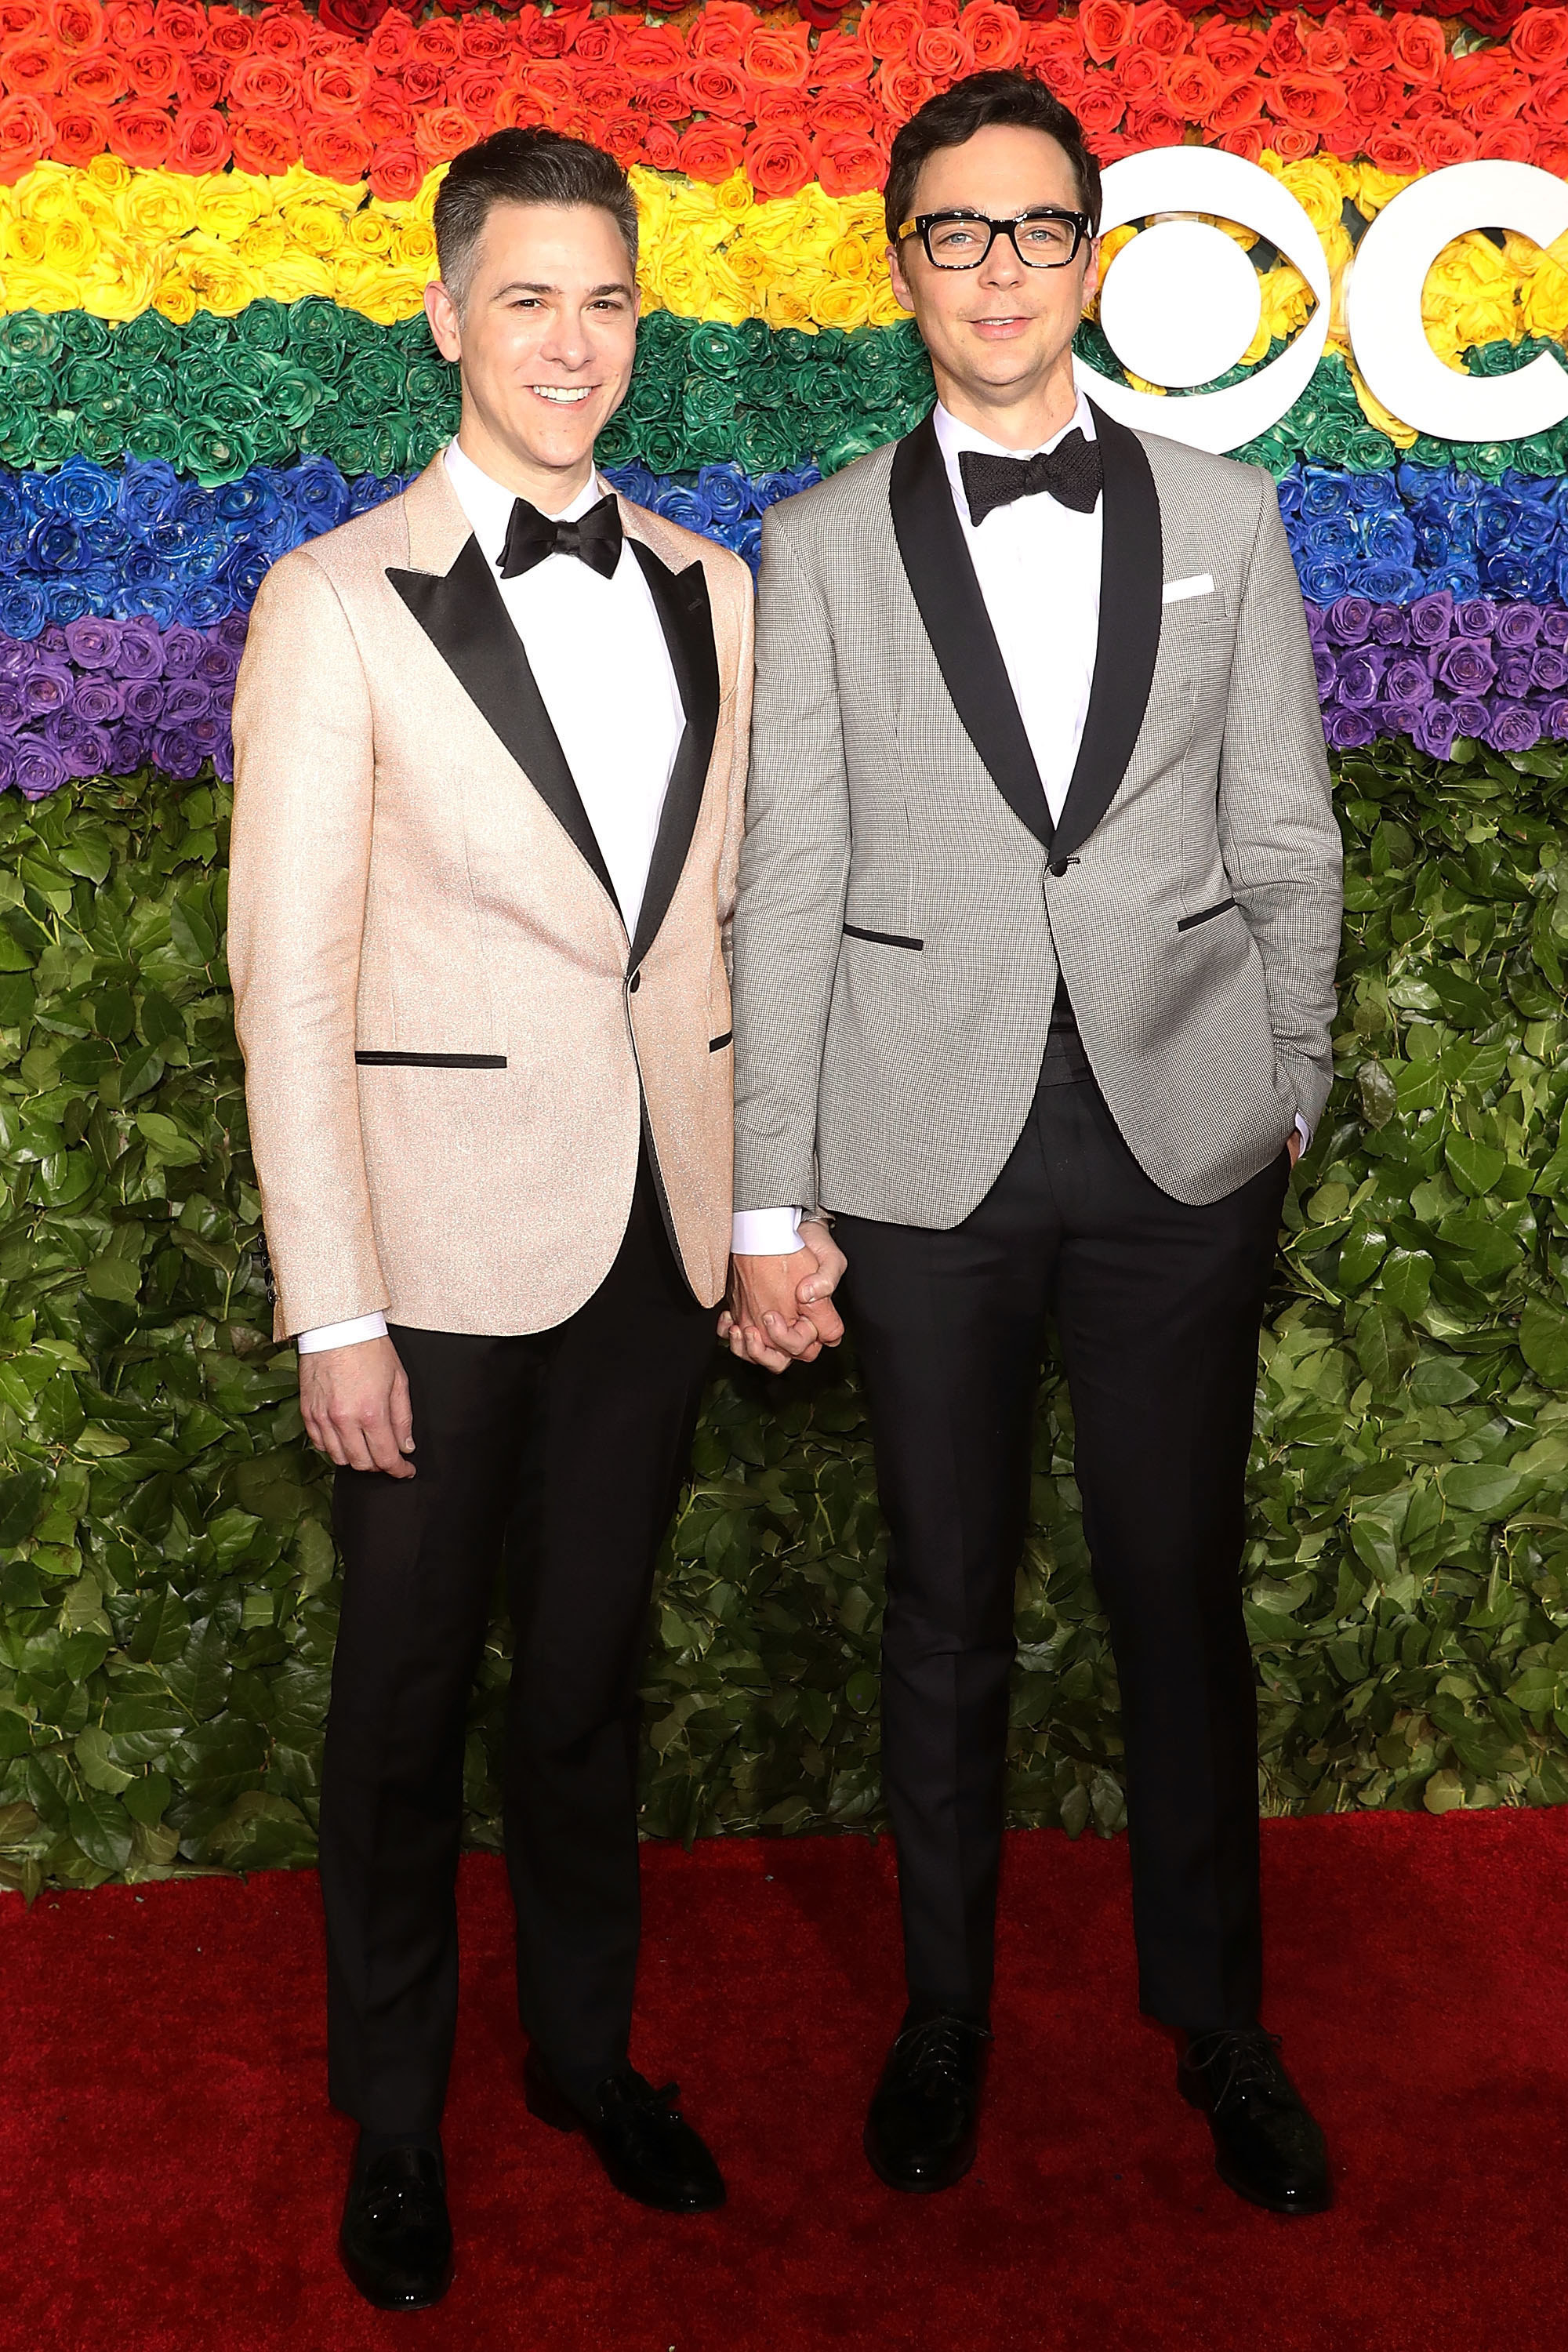 Jim Parsons and his partner on the red carpet